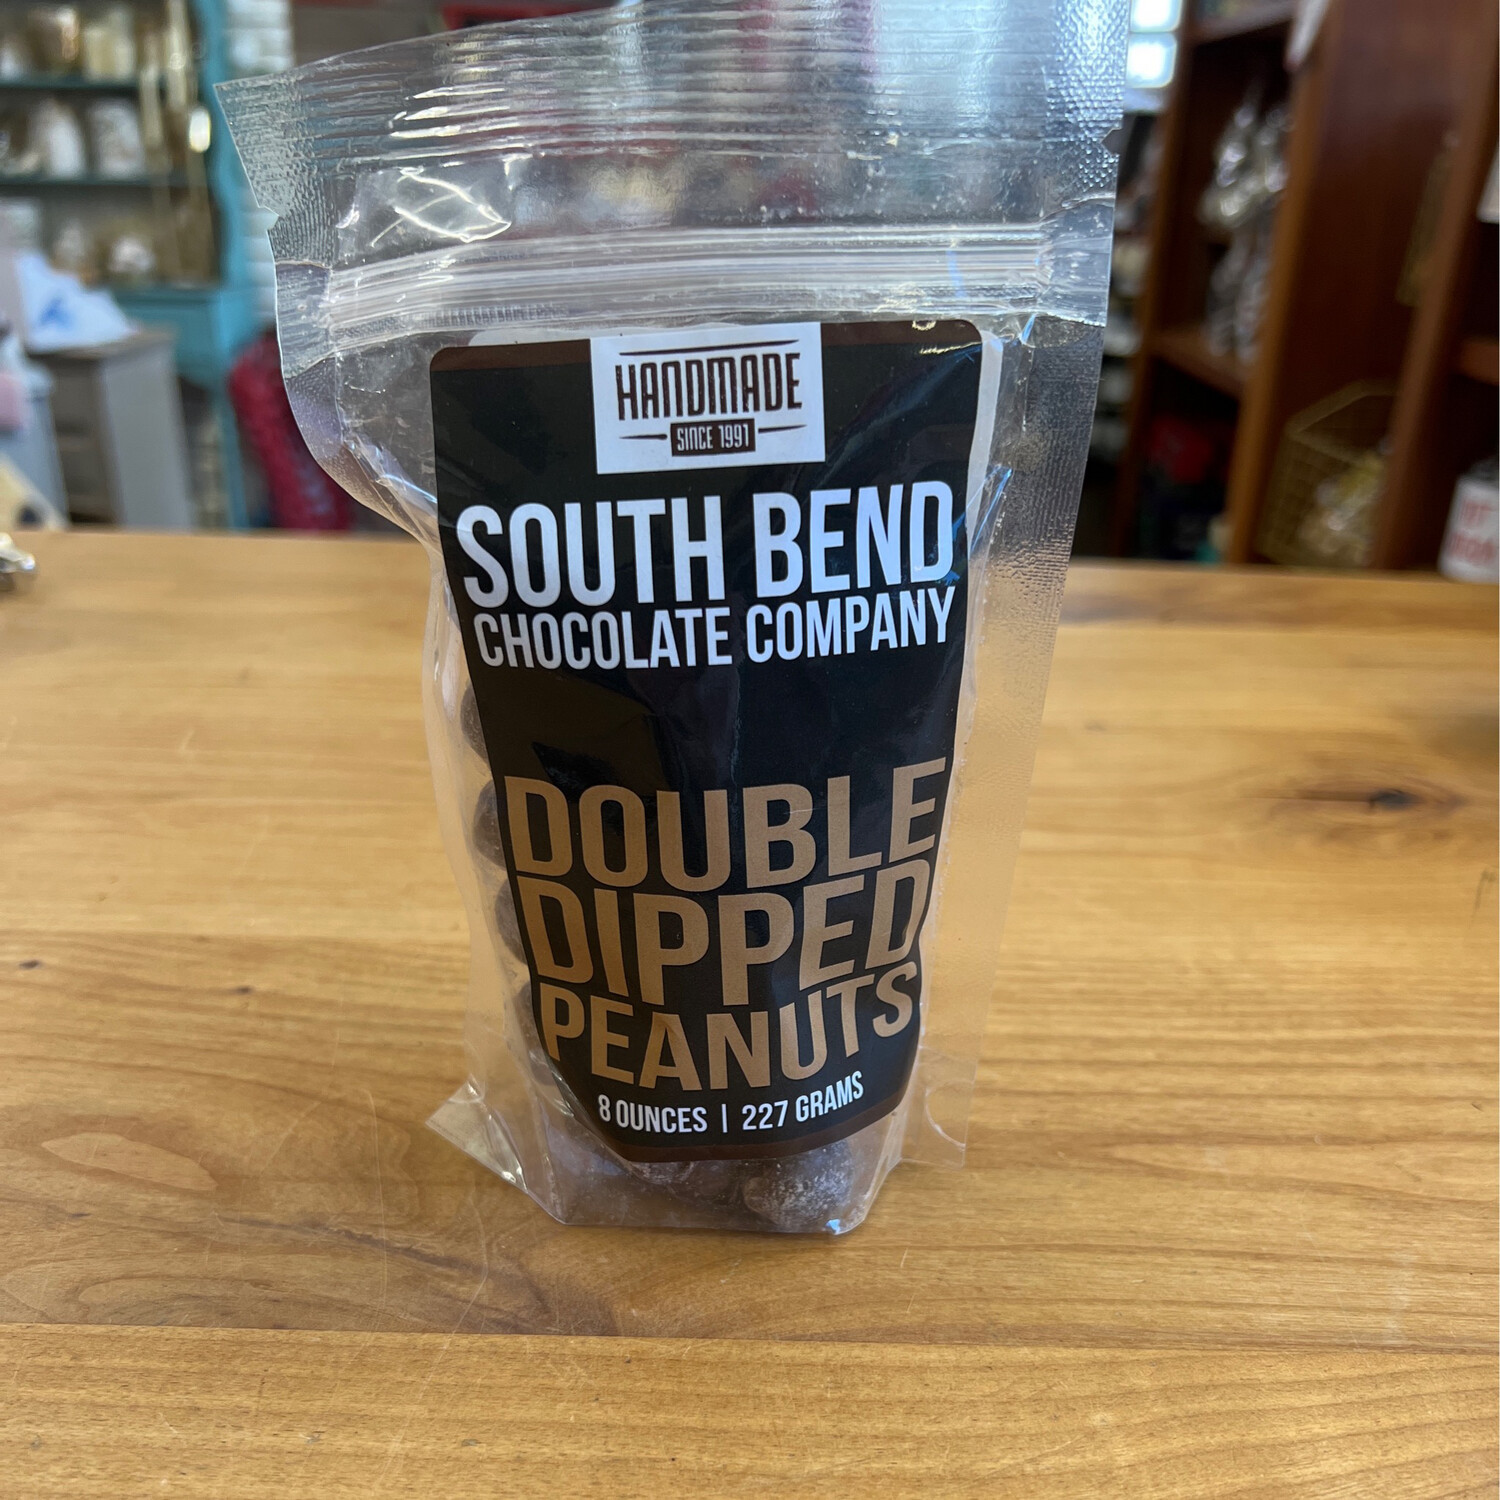 Double Dipped Peanuts